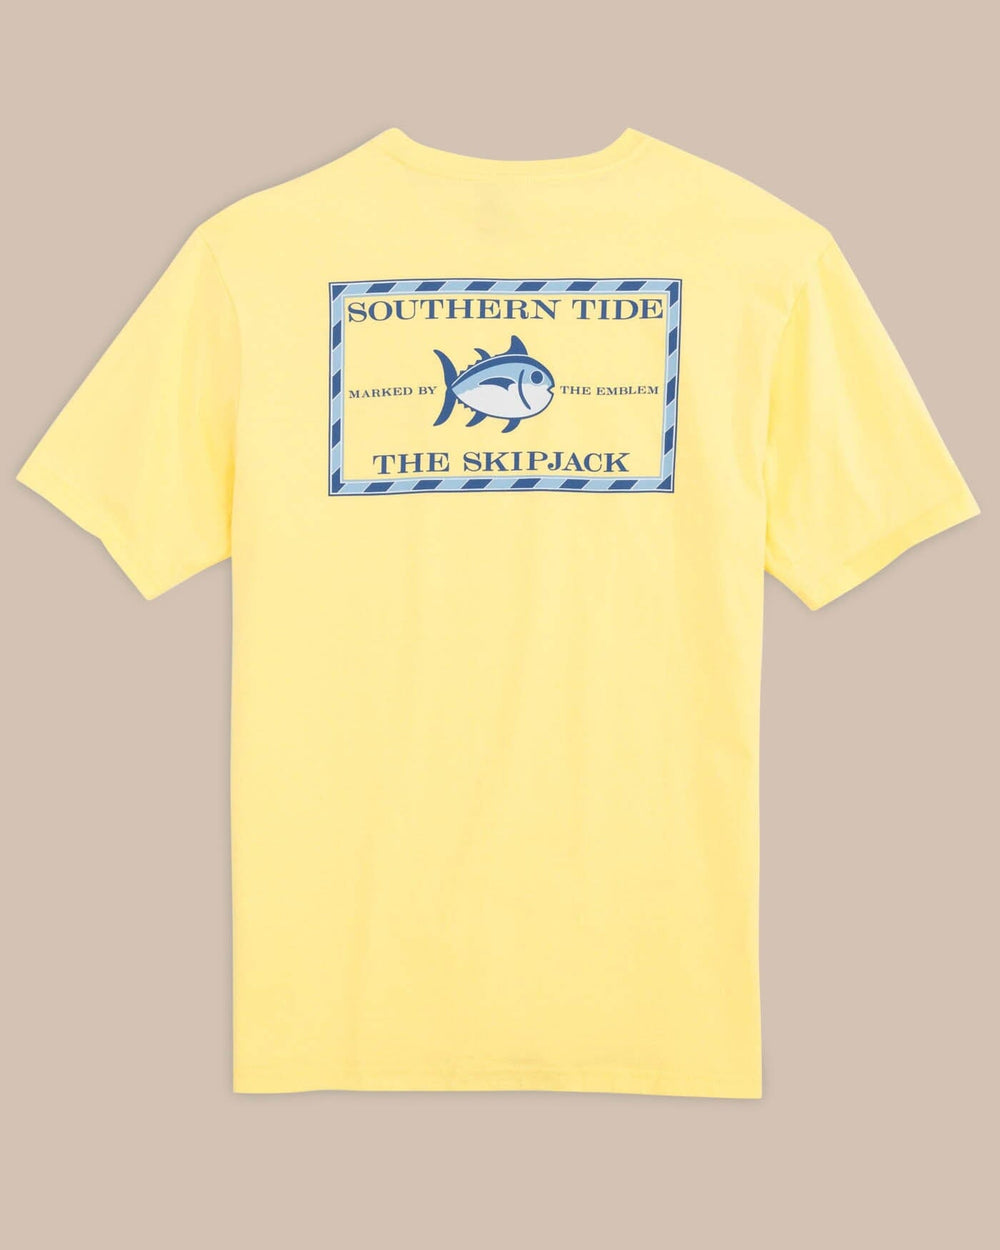 The back view of the Southern Tide Original Skipjack Short Sleeve T-Shirt by Southern Tide - Tuscan Sun